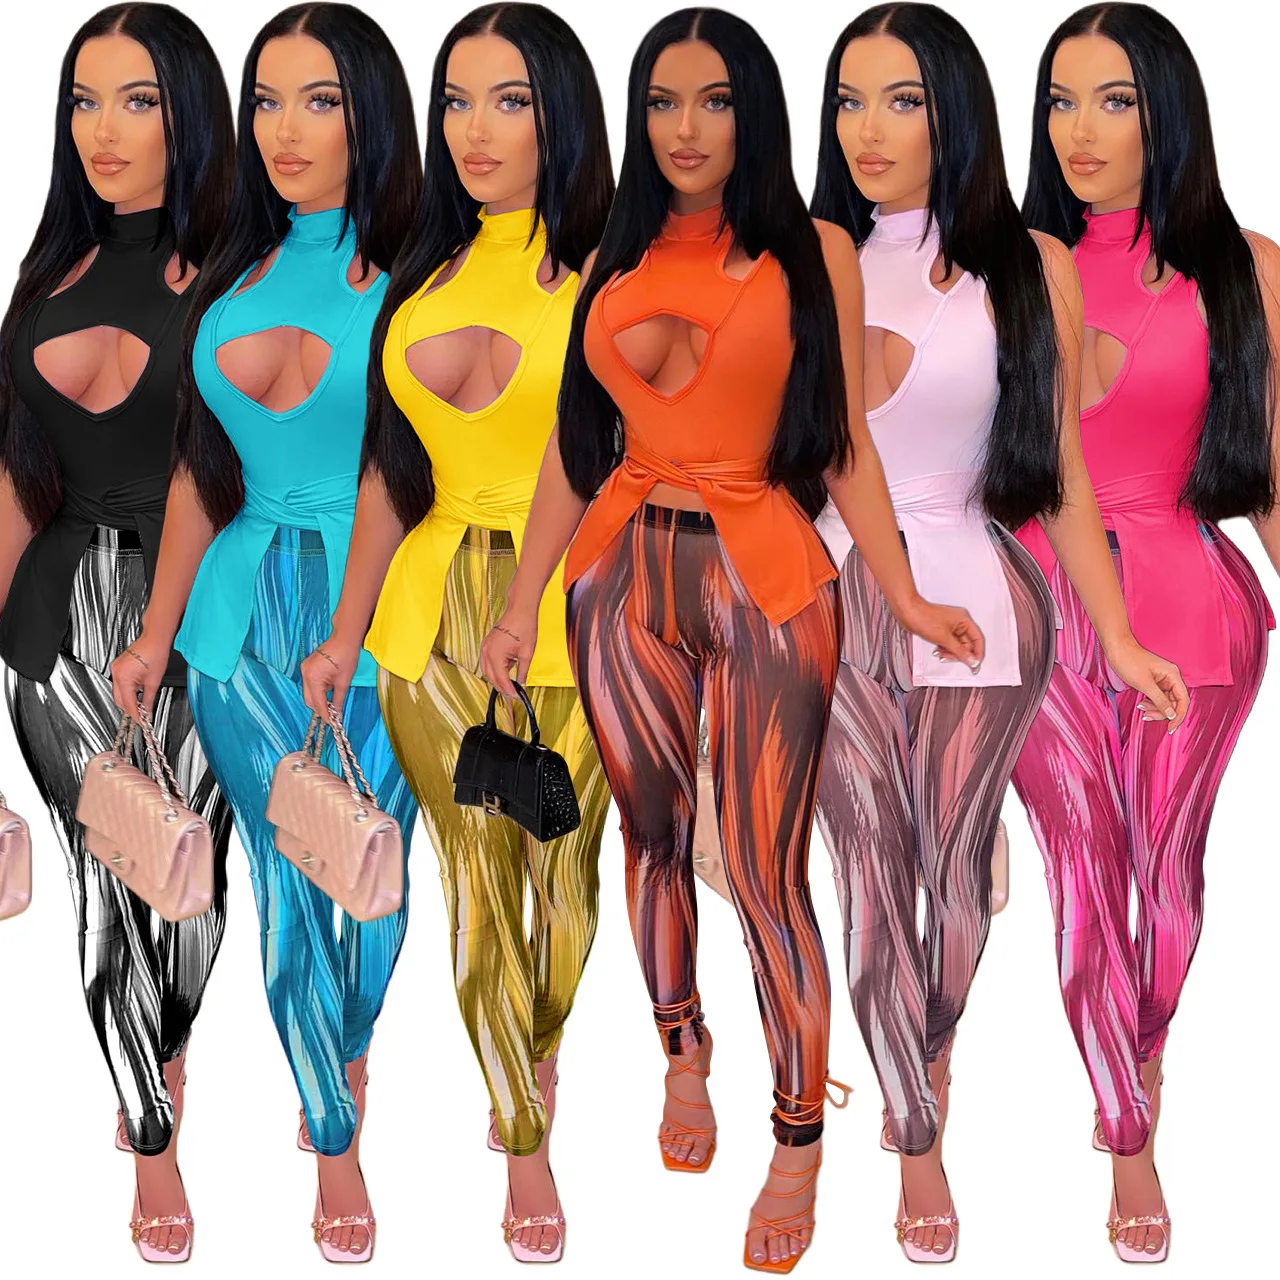 WEIN Wholesale Items for Business 2 Peice Set Women Matching Sets Sleeveless Hollow Out Sexy Top Shirt Print Skinny Pant